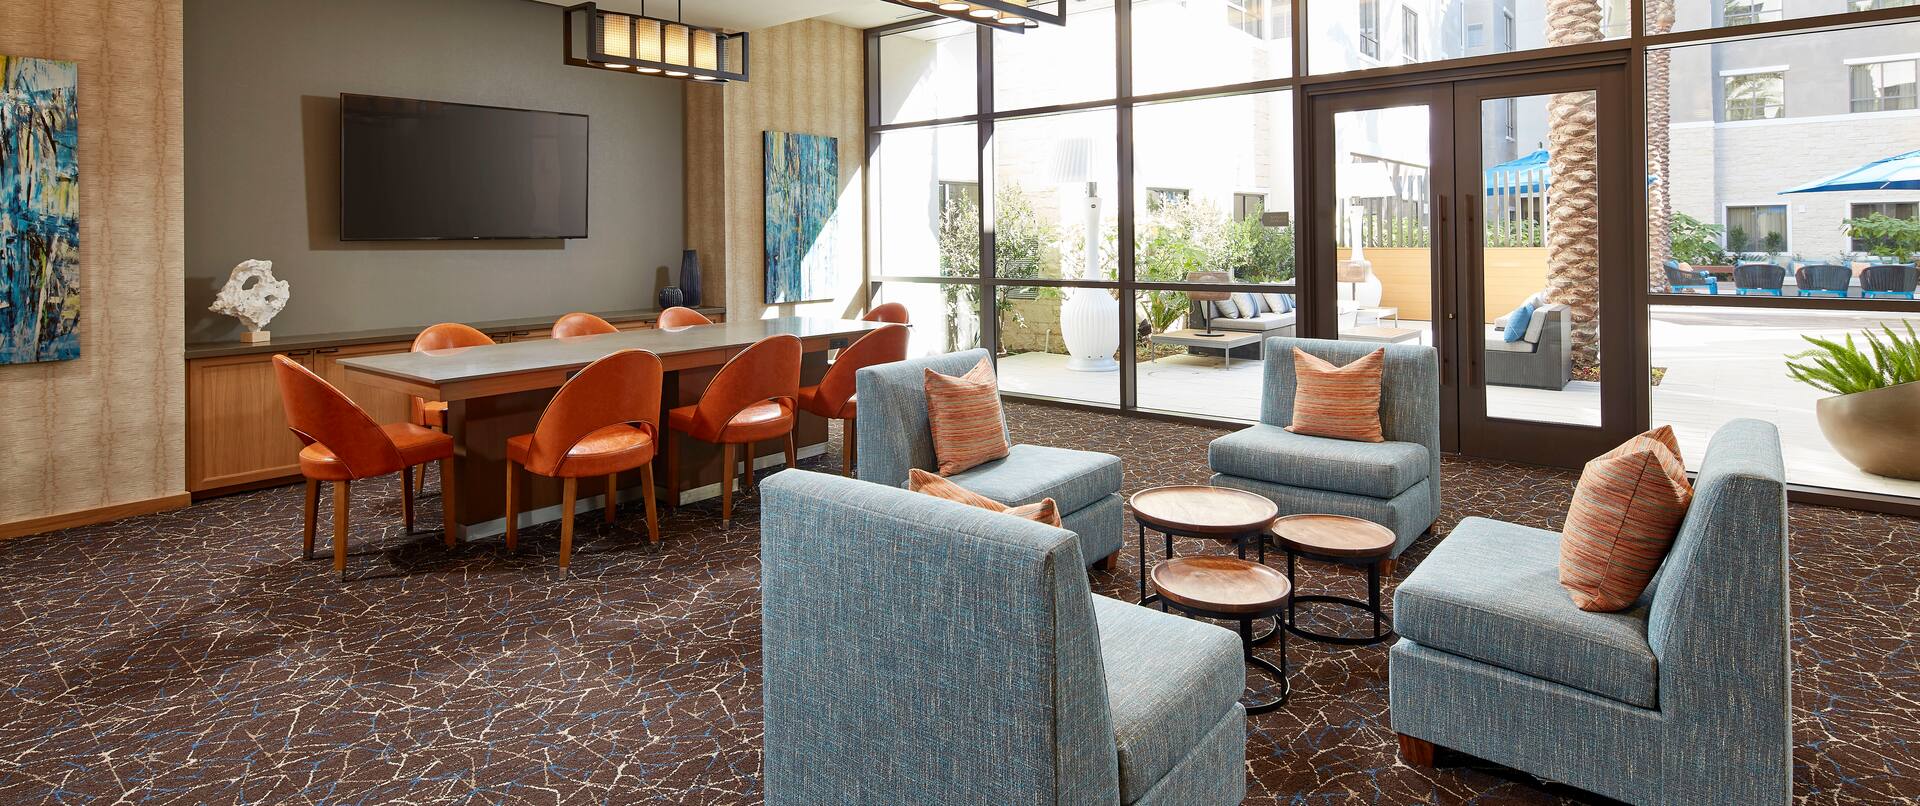 Interior Common Seating Area with HDTV, Four Cushioned Chairs, a Table with Seating for Eight, and a View of the Patio through the Floor-to-Ceiling Windows and Doors